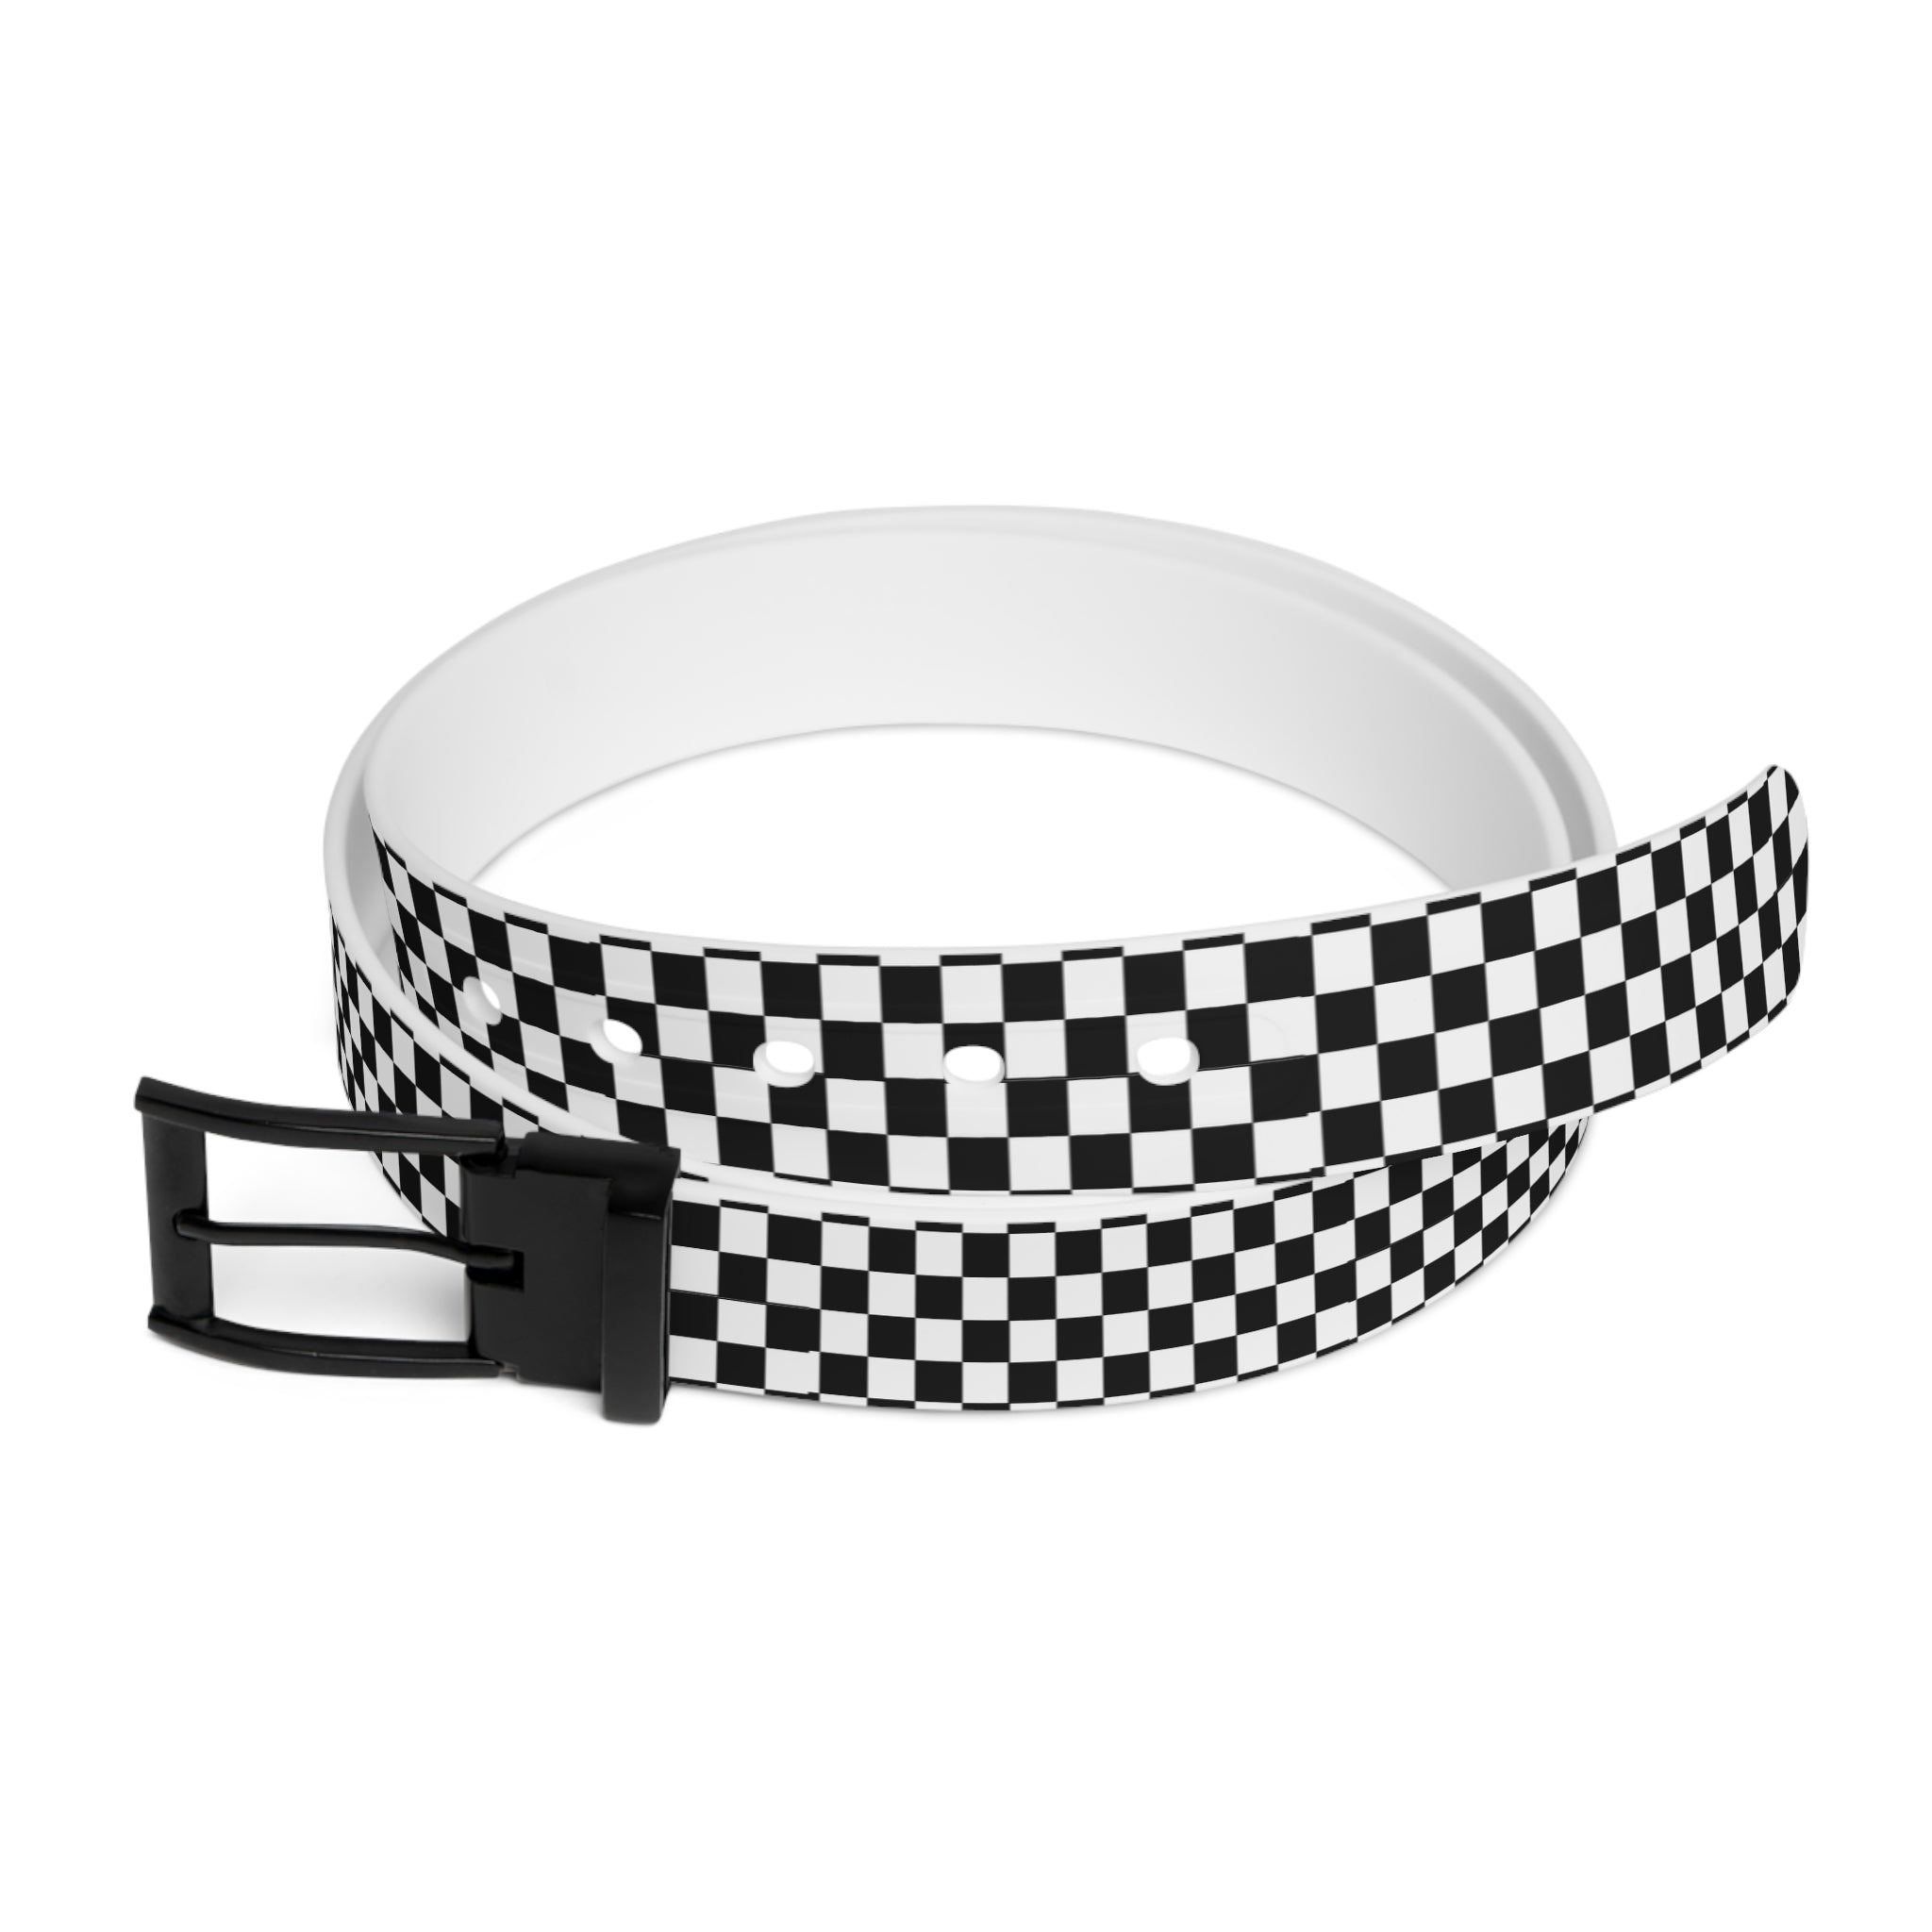 Check Mate in Black and White Unisex Fashion Belt, Luxury Women's Belt, Men's Belt, Cut-to-size Belt Accessories Black-Metal-50 The Middle Aged Groove